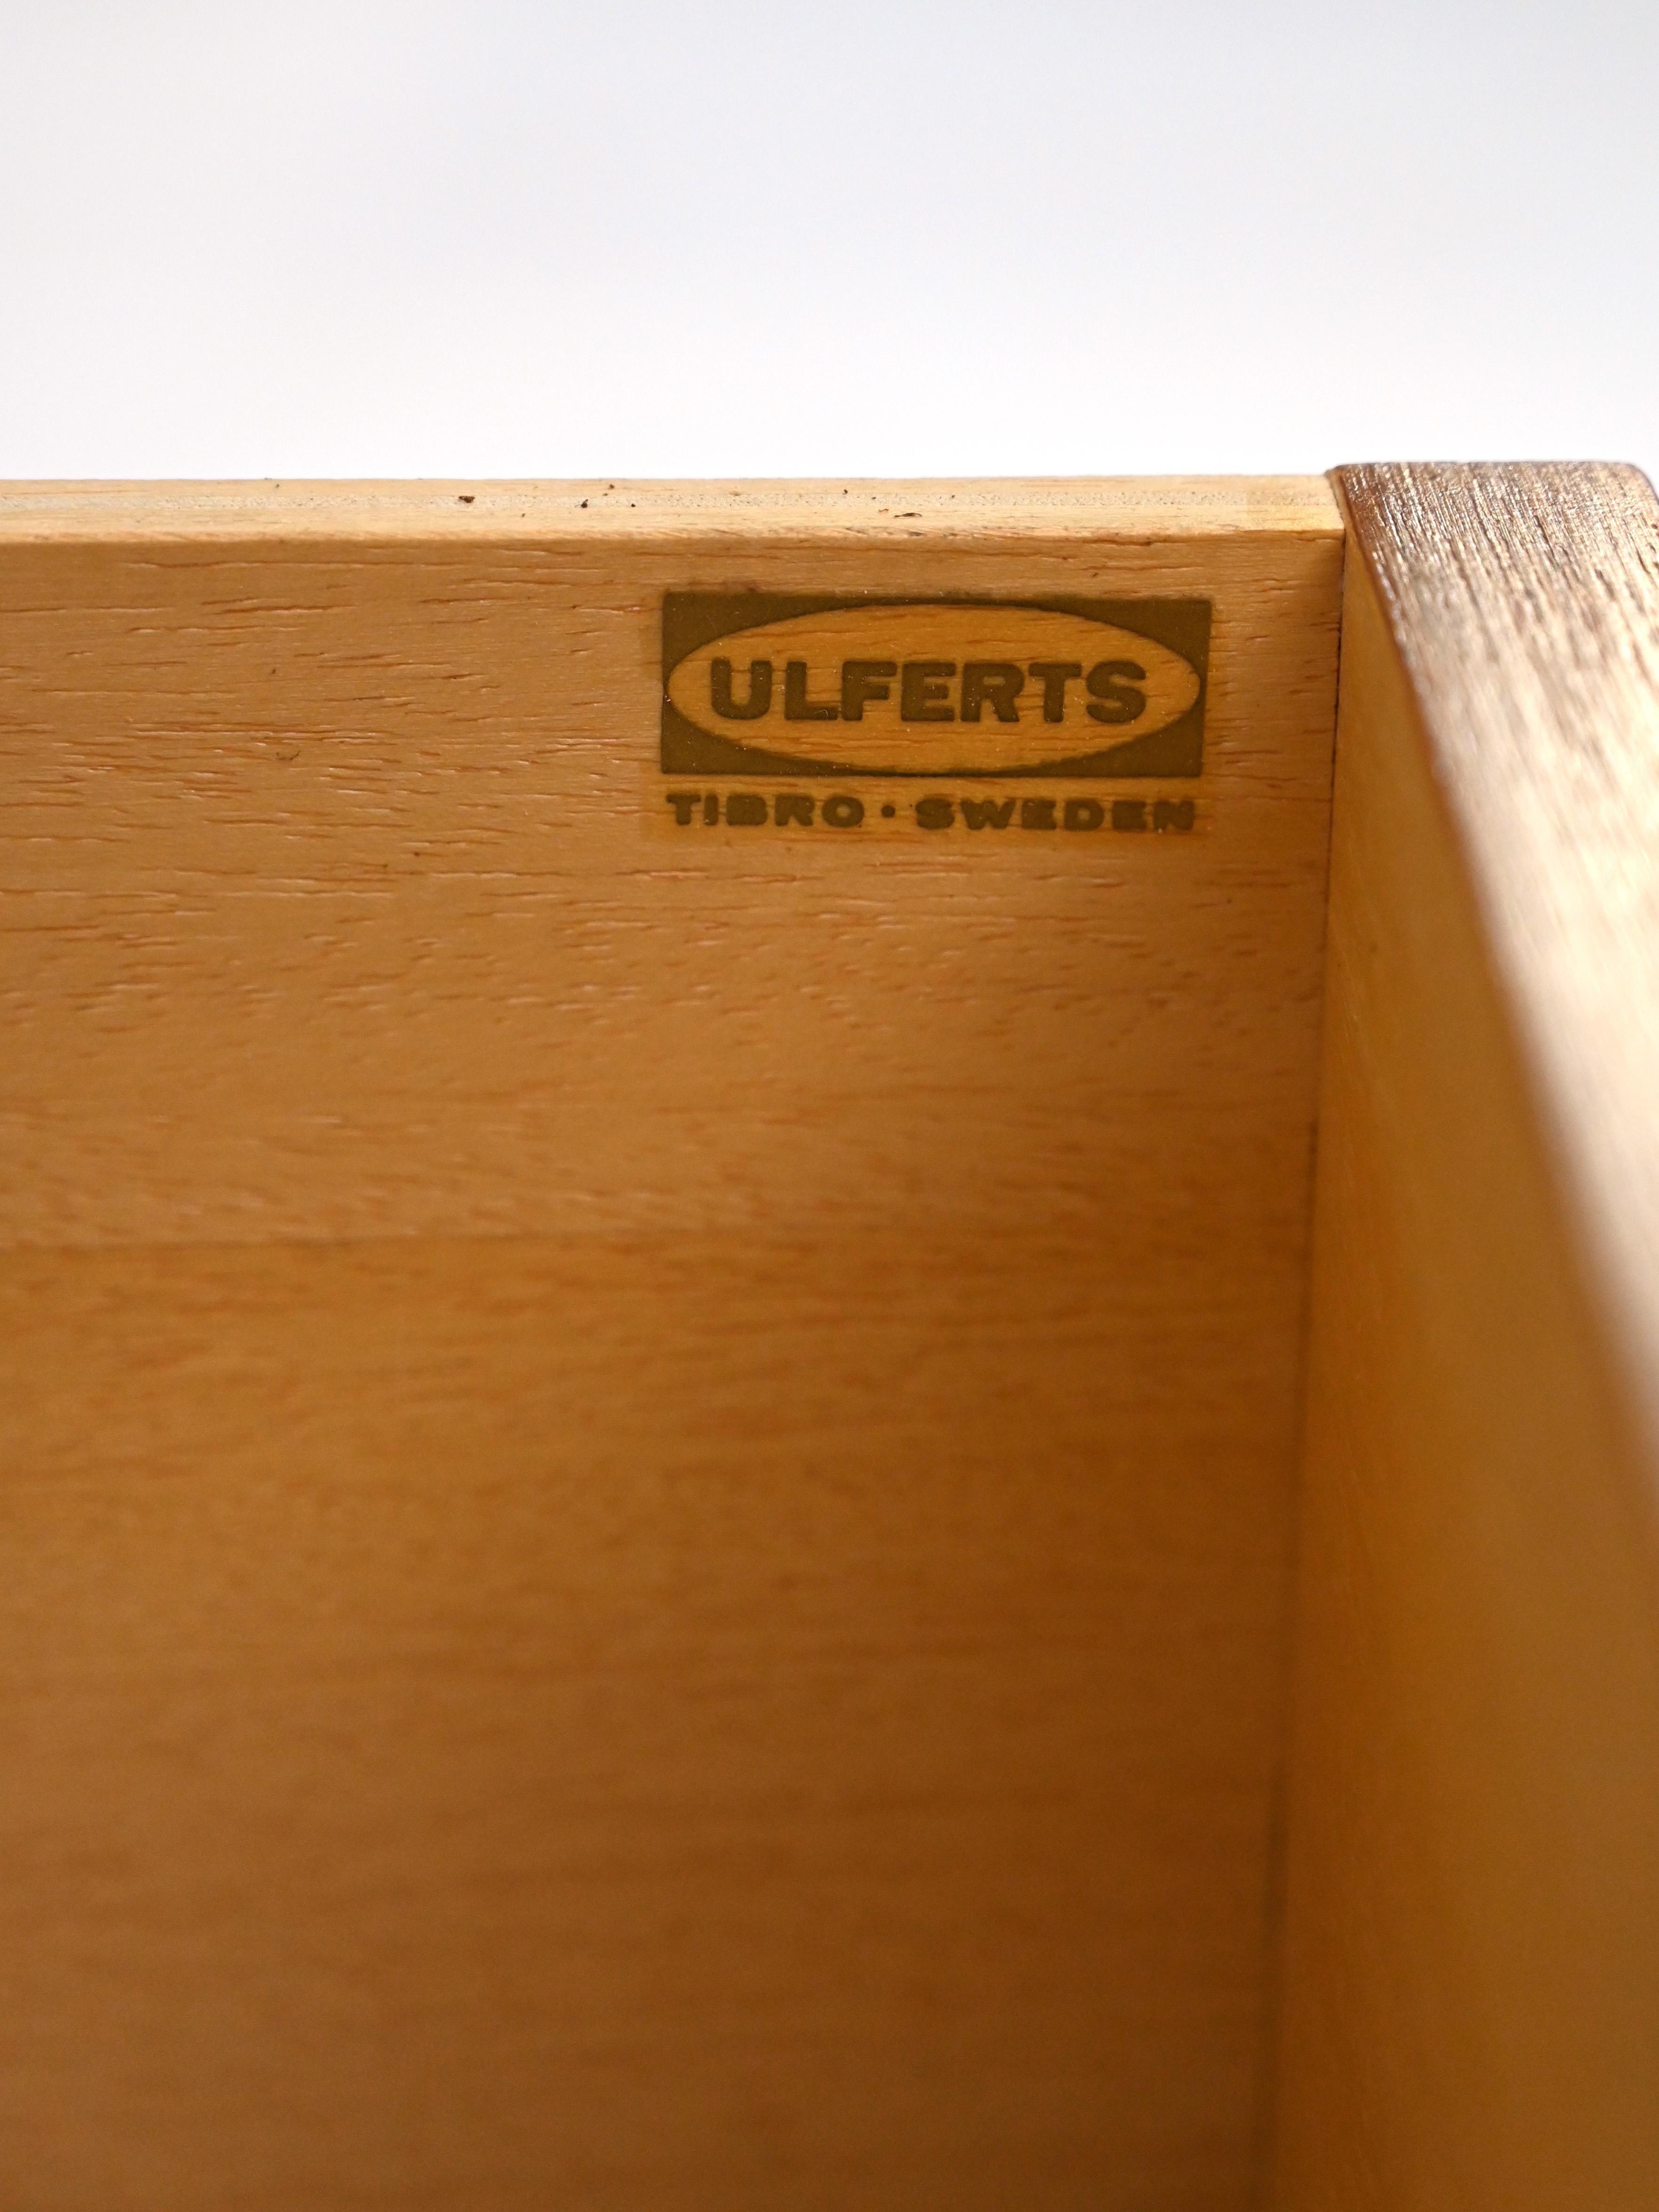 Vintage TV Cabinet Manufactured by Ulferts 3